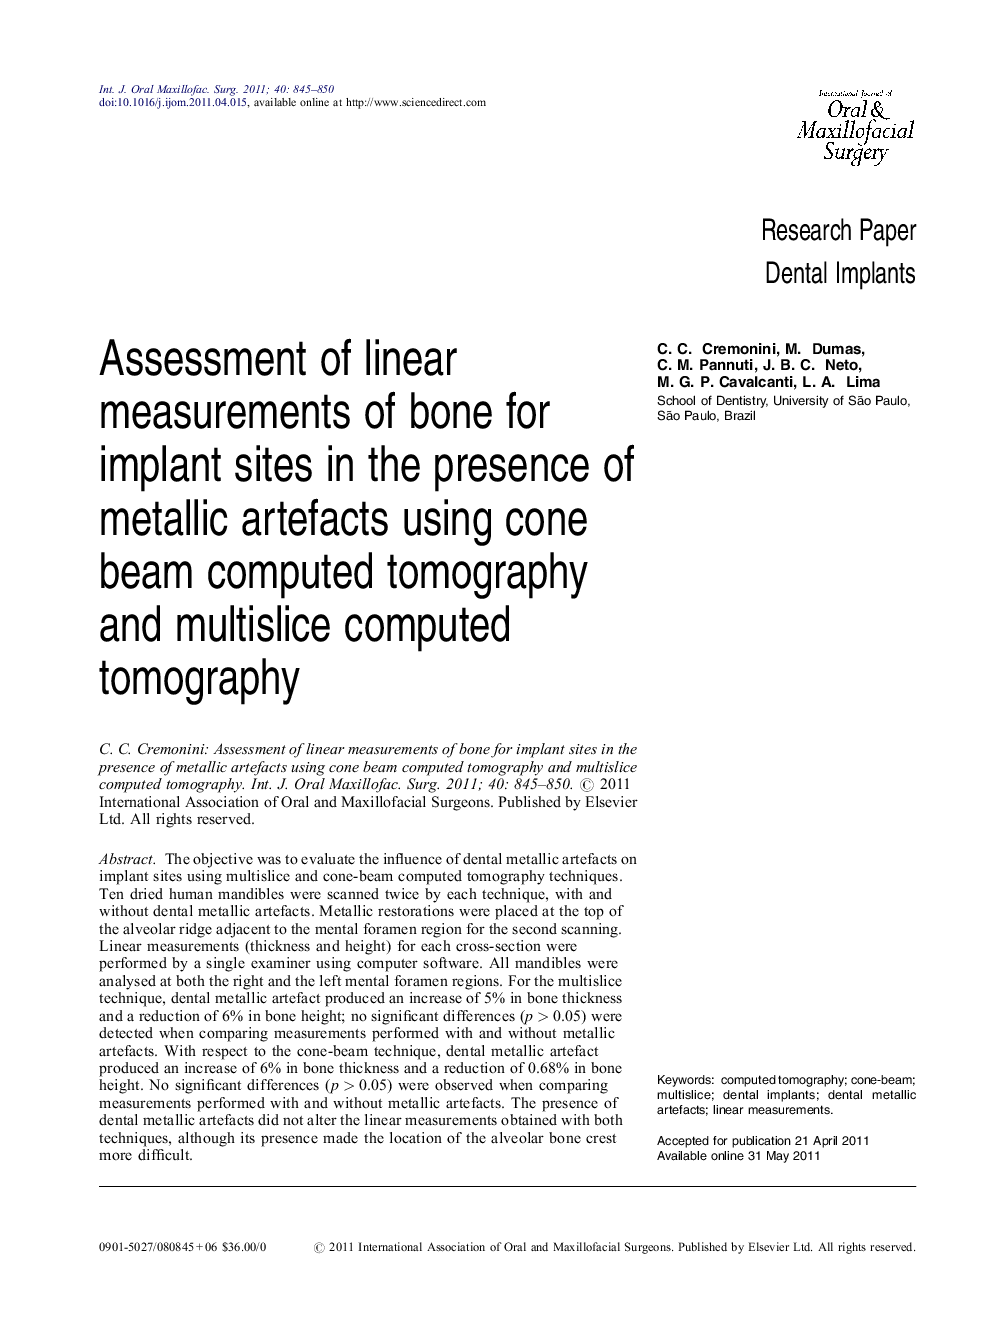 Assessment of linear measurements of bone for implant sites in the presence of metallic artefacts using cone beam computed tomography and multislice computed tomography